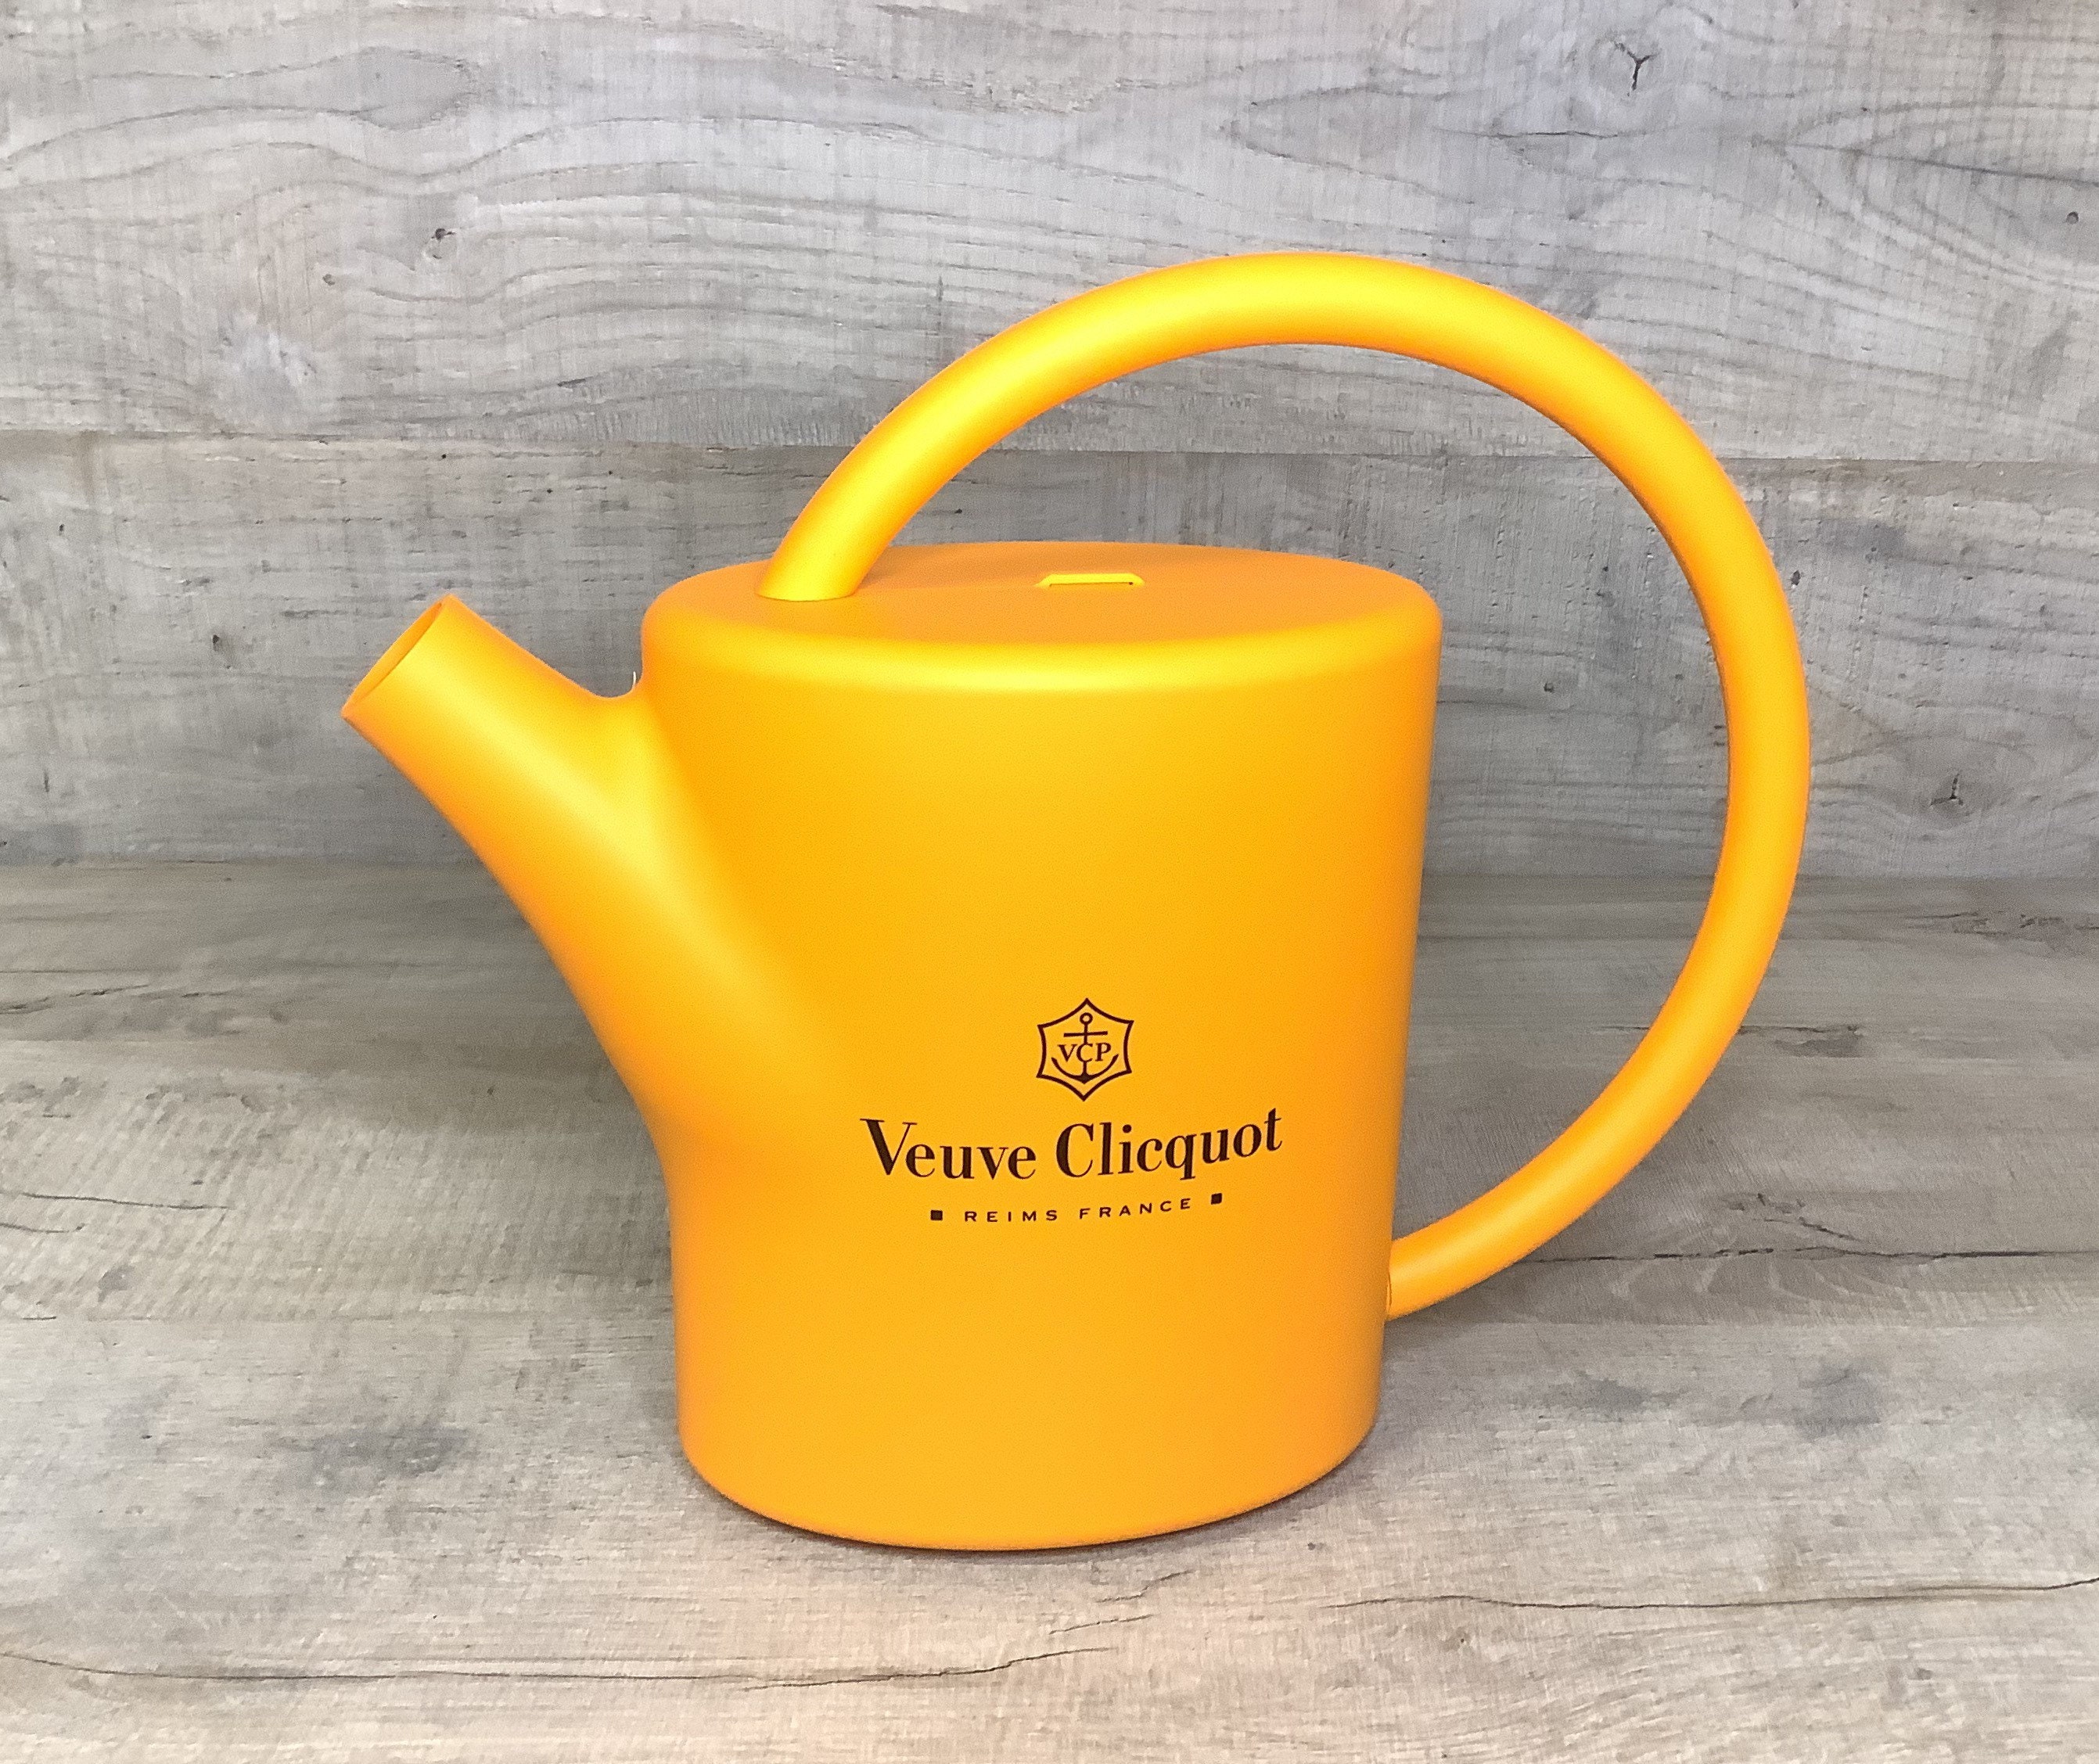 Veuve Clicquot Arrosoir/ Champagne Ice Bucket From Veuve Clicquot/Cooler French Vintage Wine Made in